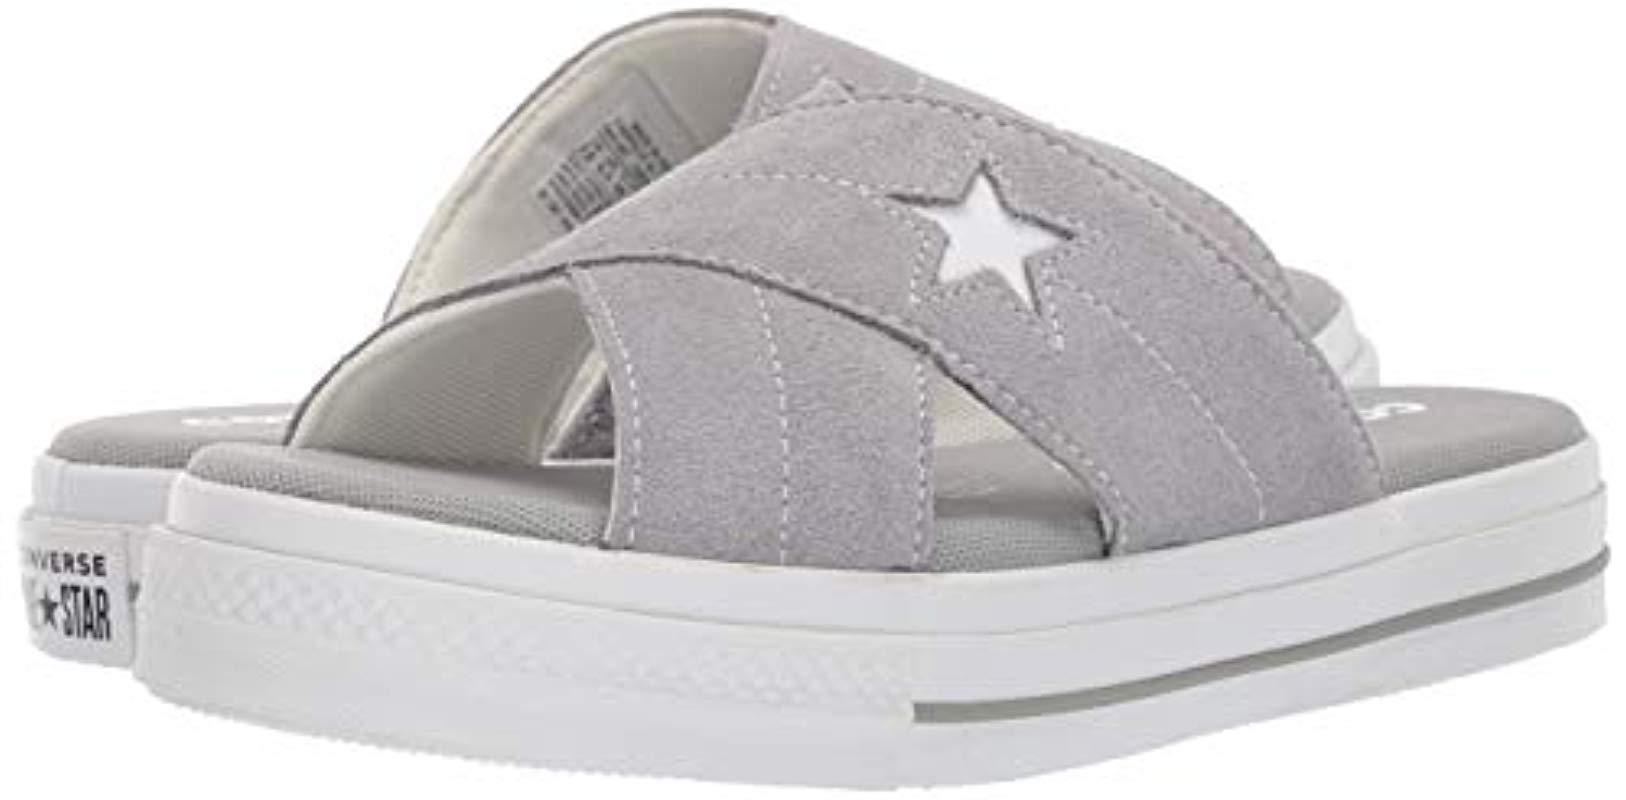 Converse Suede One Star Sandal in Gray (White) - Lyst